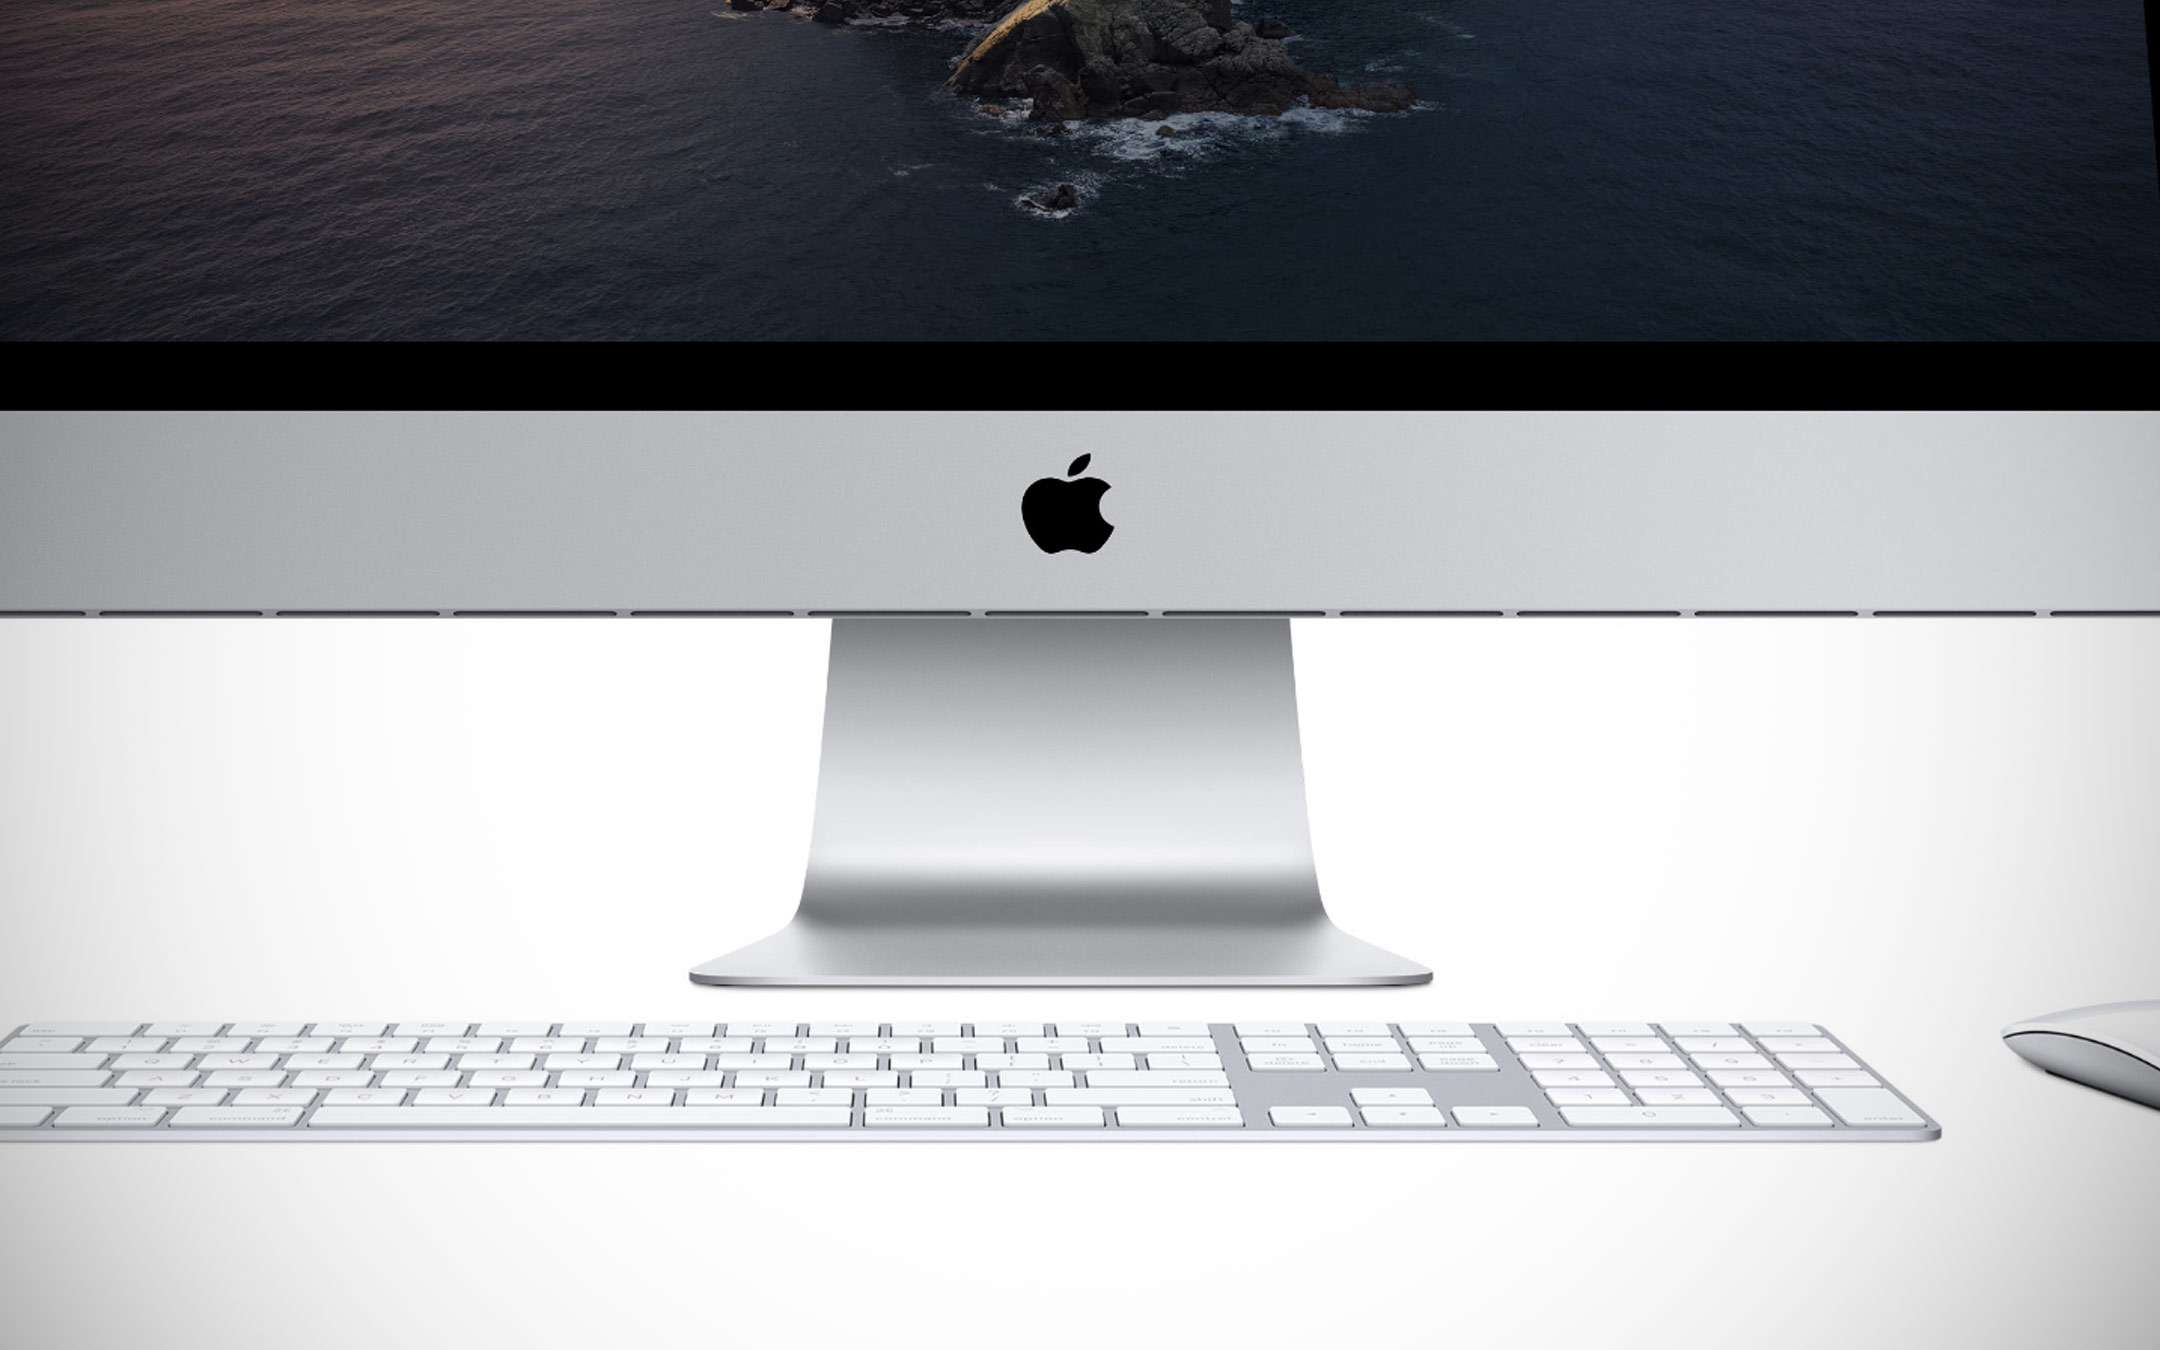 WWDC 2020: the announcement of Macs with ARM processors